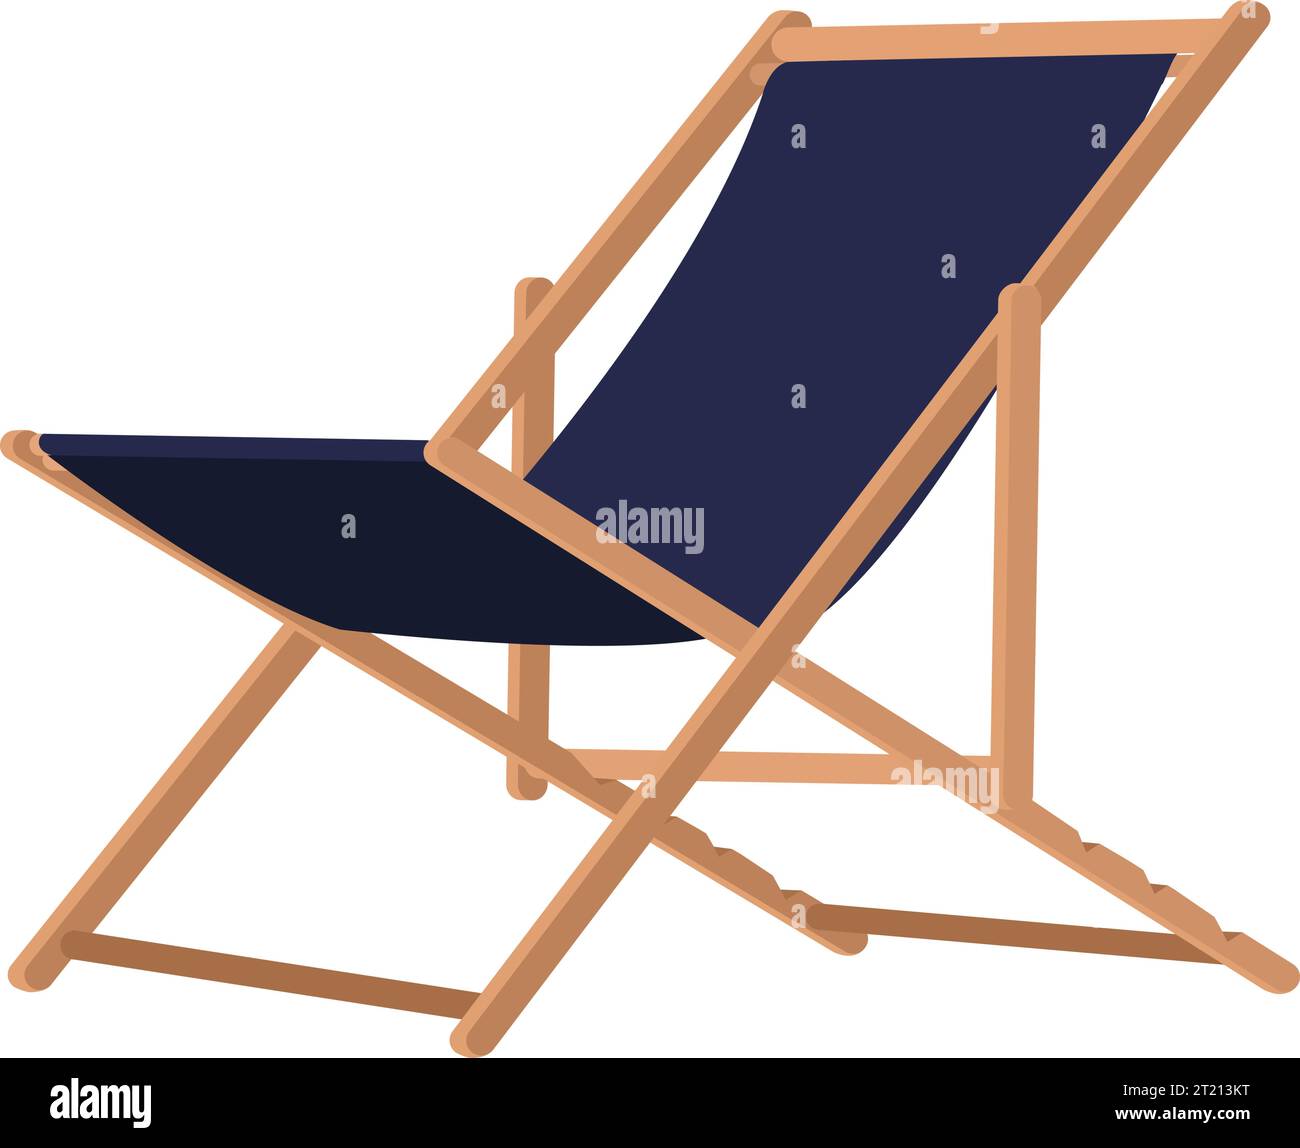 Isolated wooden deckchair with blue canvas, beach and vacations concept Stock Vector